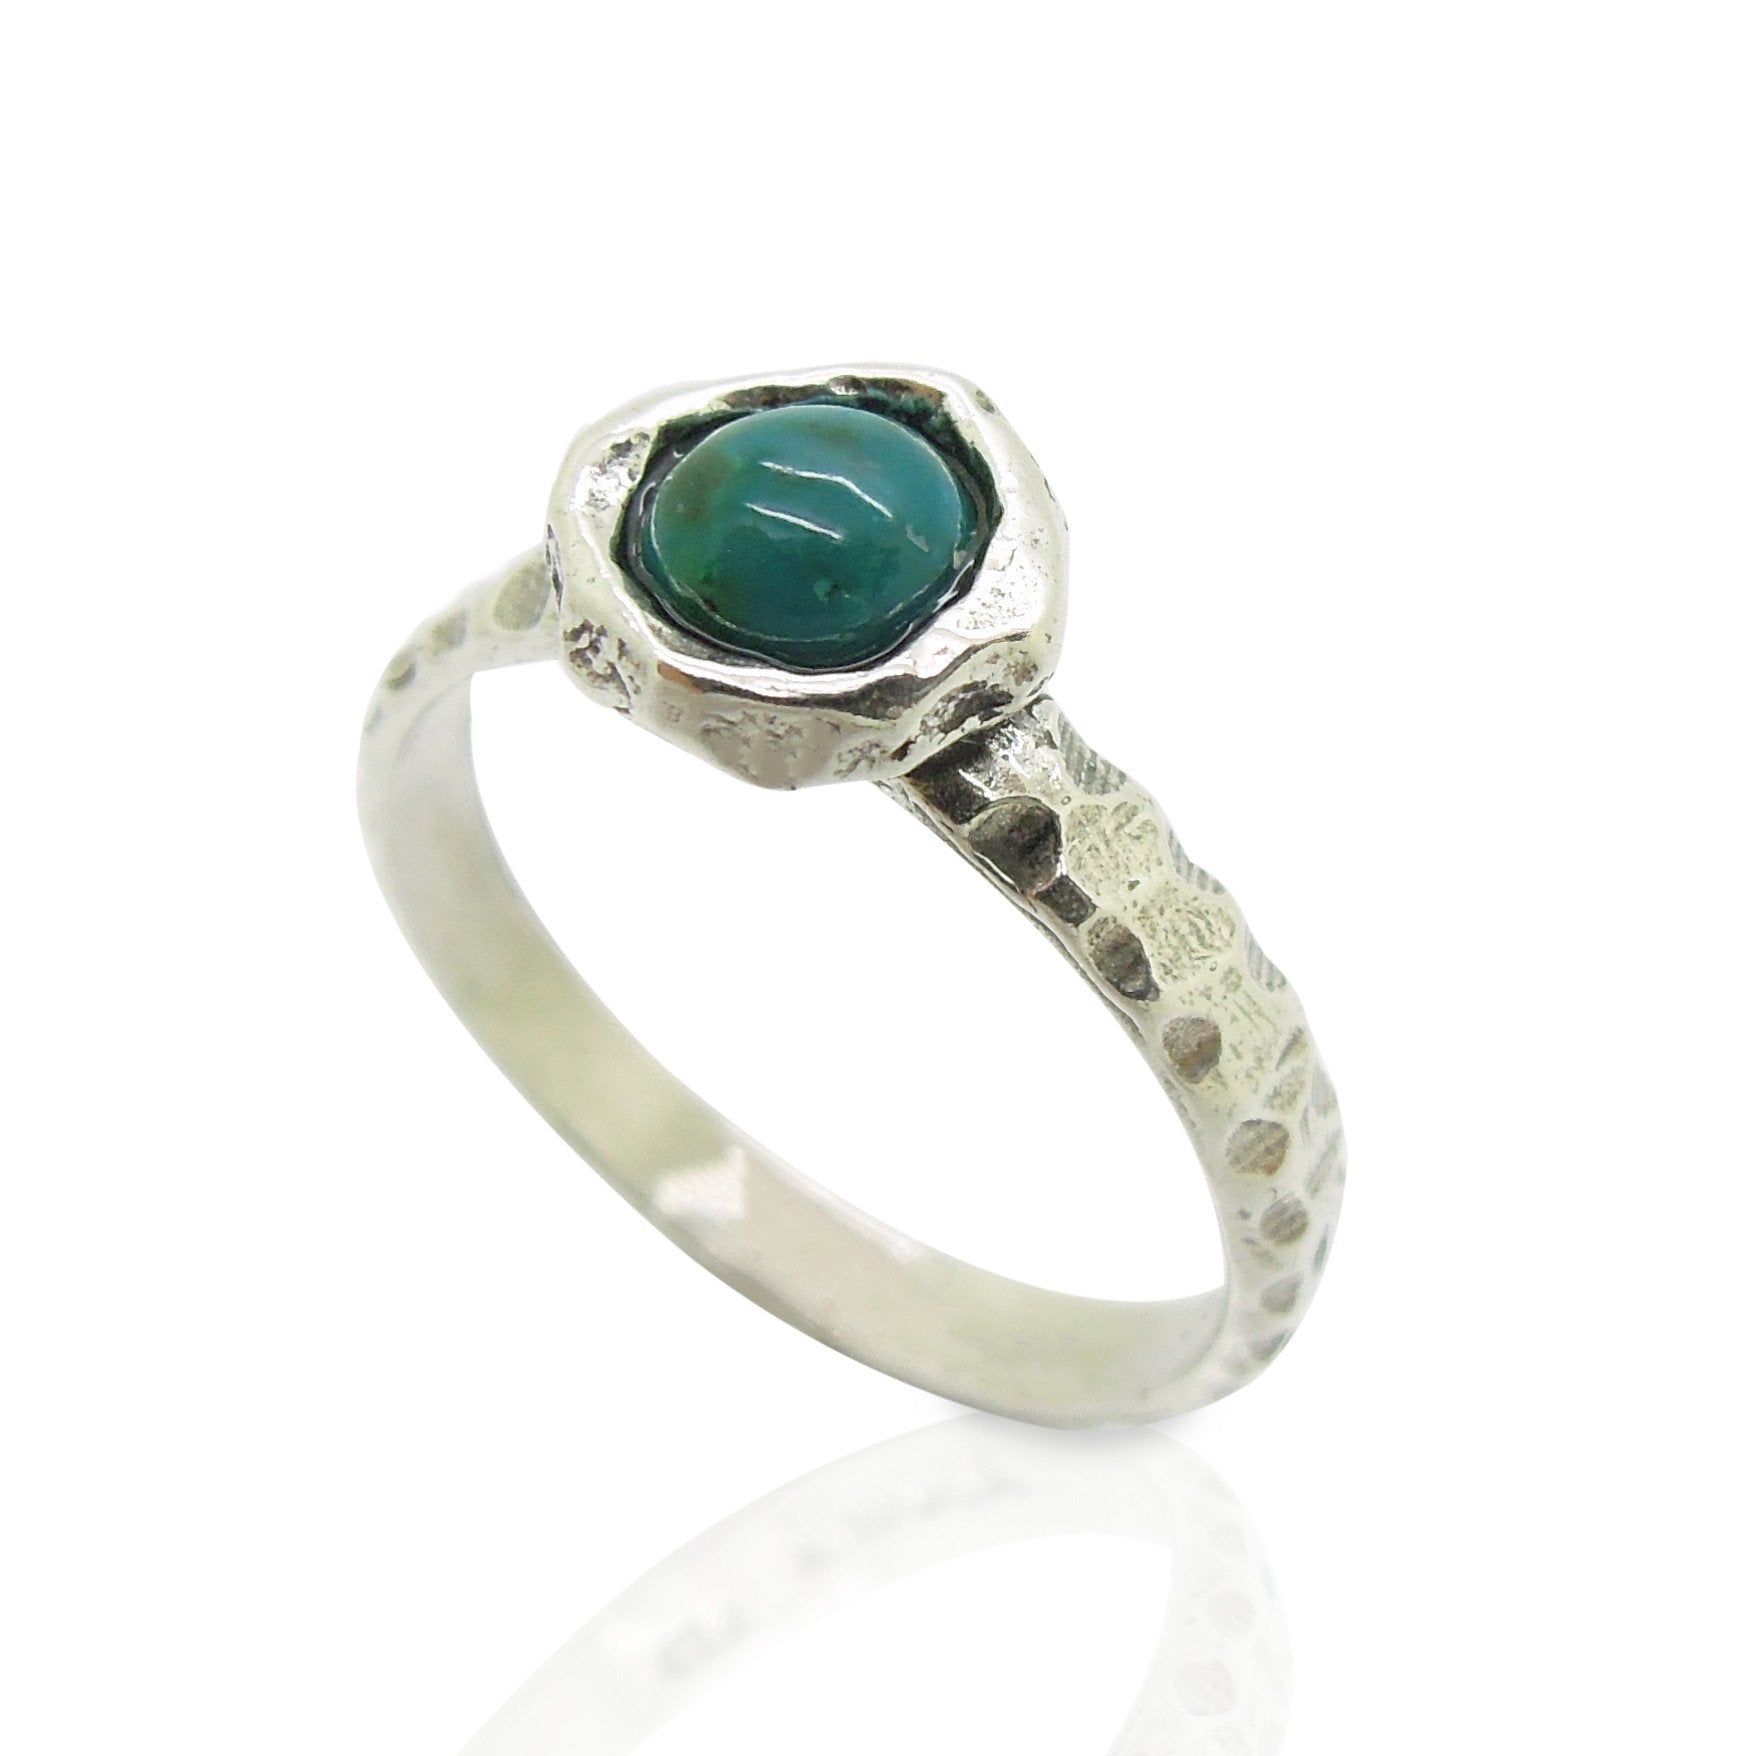 Eilat stone Criscola ring set in hammered sterling silver, stacking ri ...